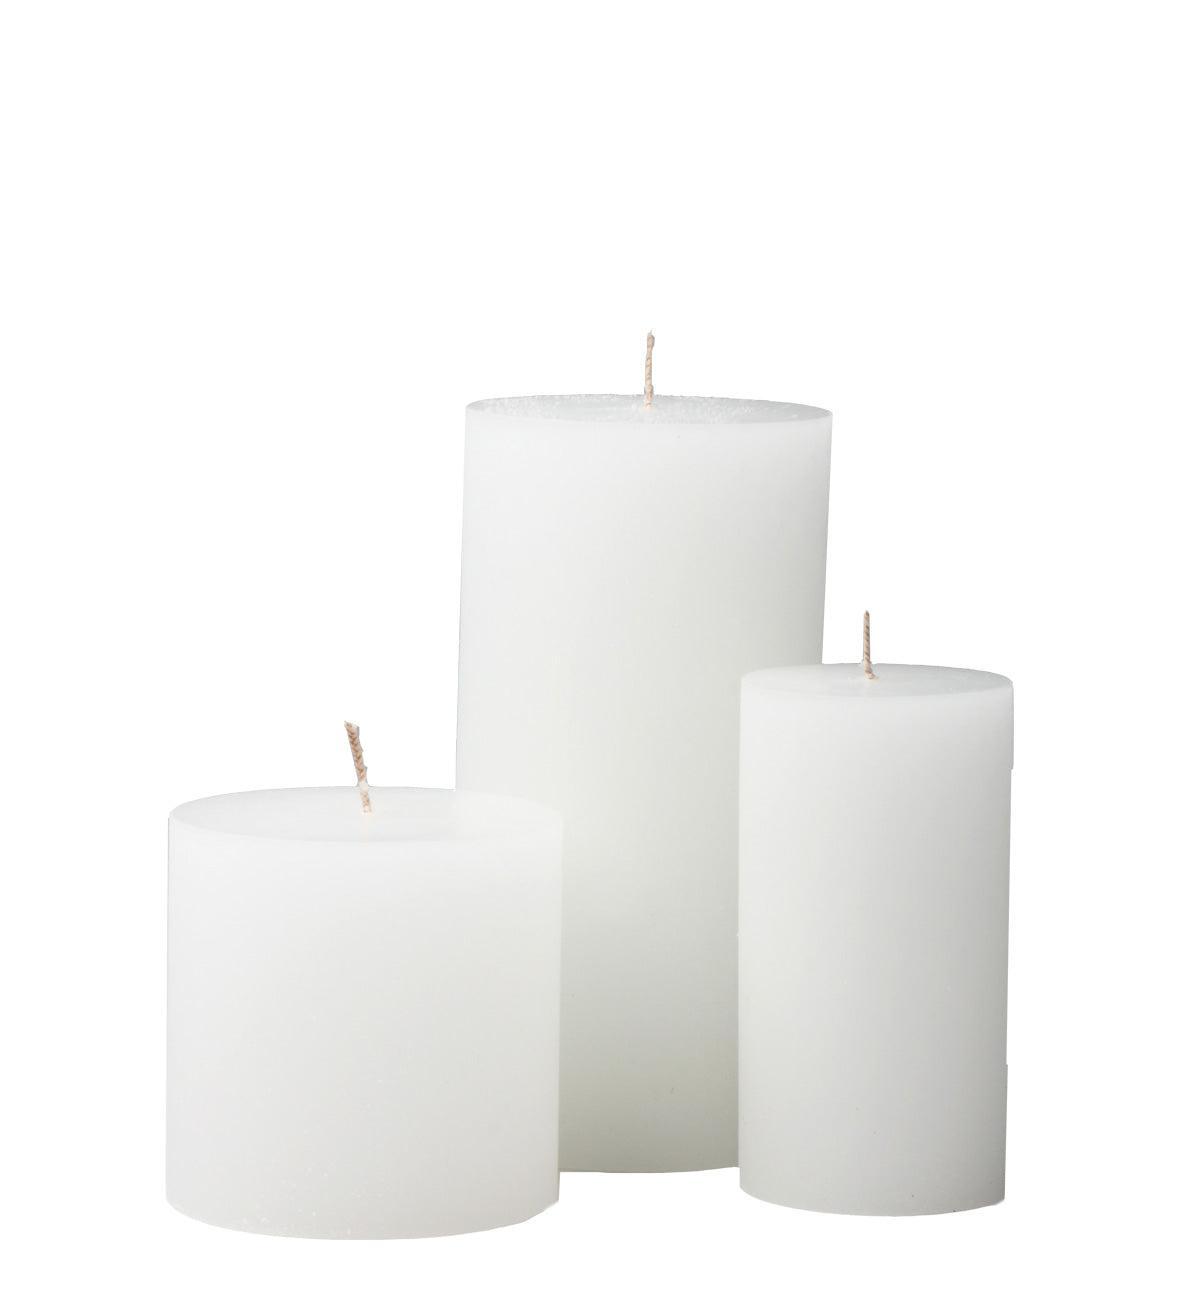 White Pure Pillar Candles Tall (Set of 4)-Comfort-CANDLES, GIFTS, SUSTAINABLE DECOR-Forest Homes-Nature inspired decor-Nature decor